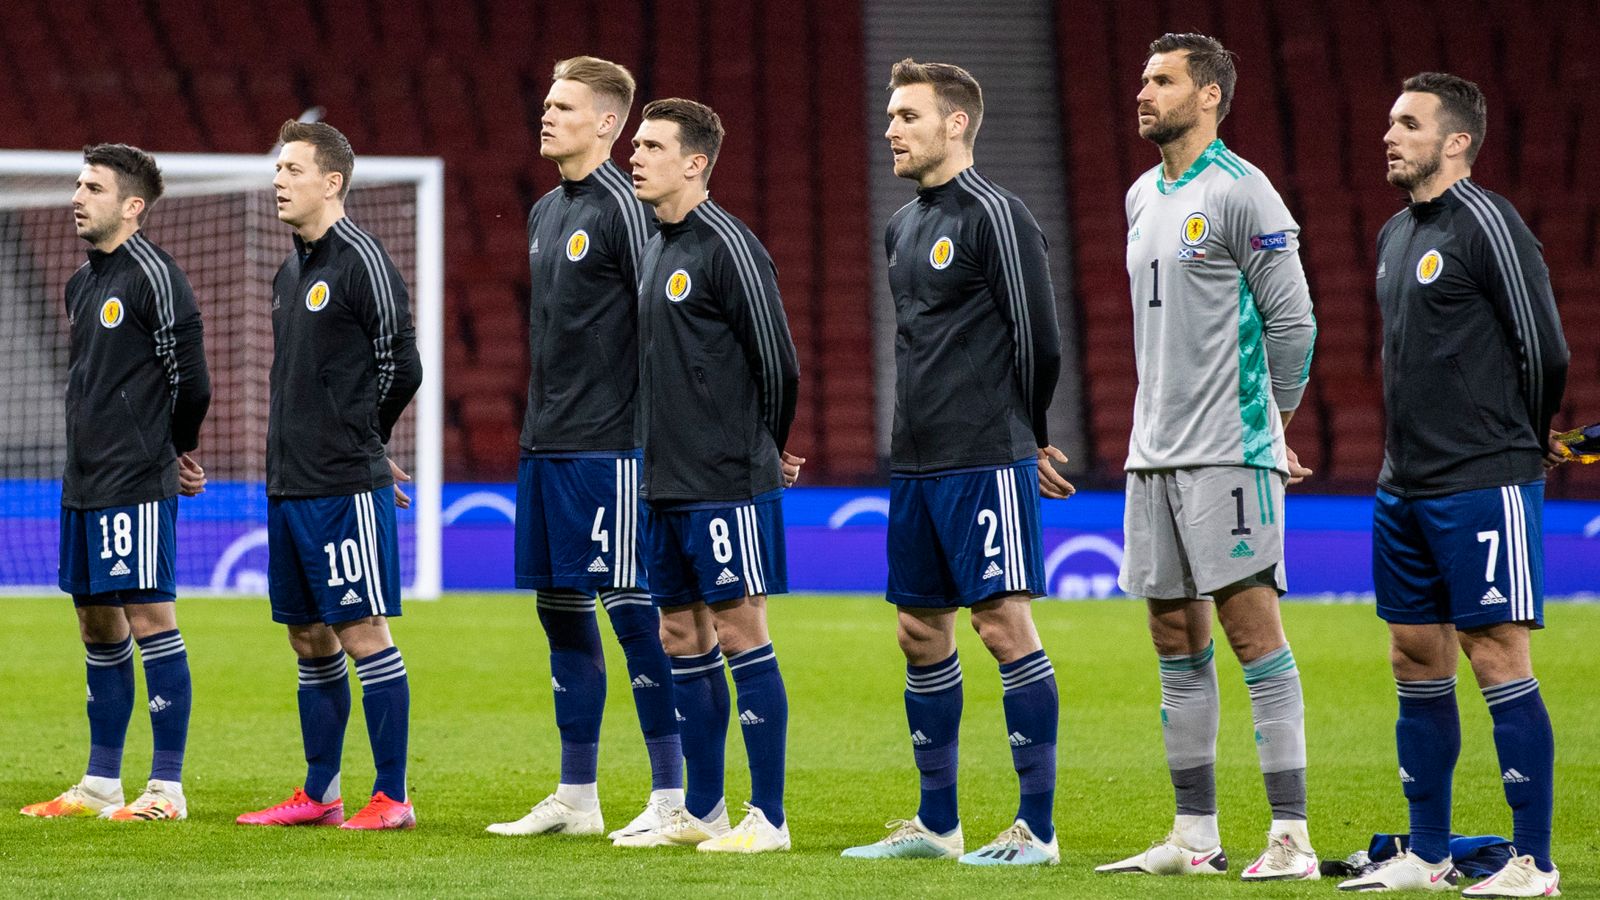 Scotland: Men's national team to stand rather than kneel in solidarity with  fight against racism | Football News | Sky Sports